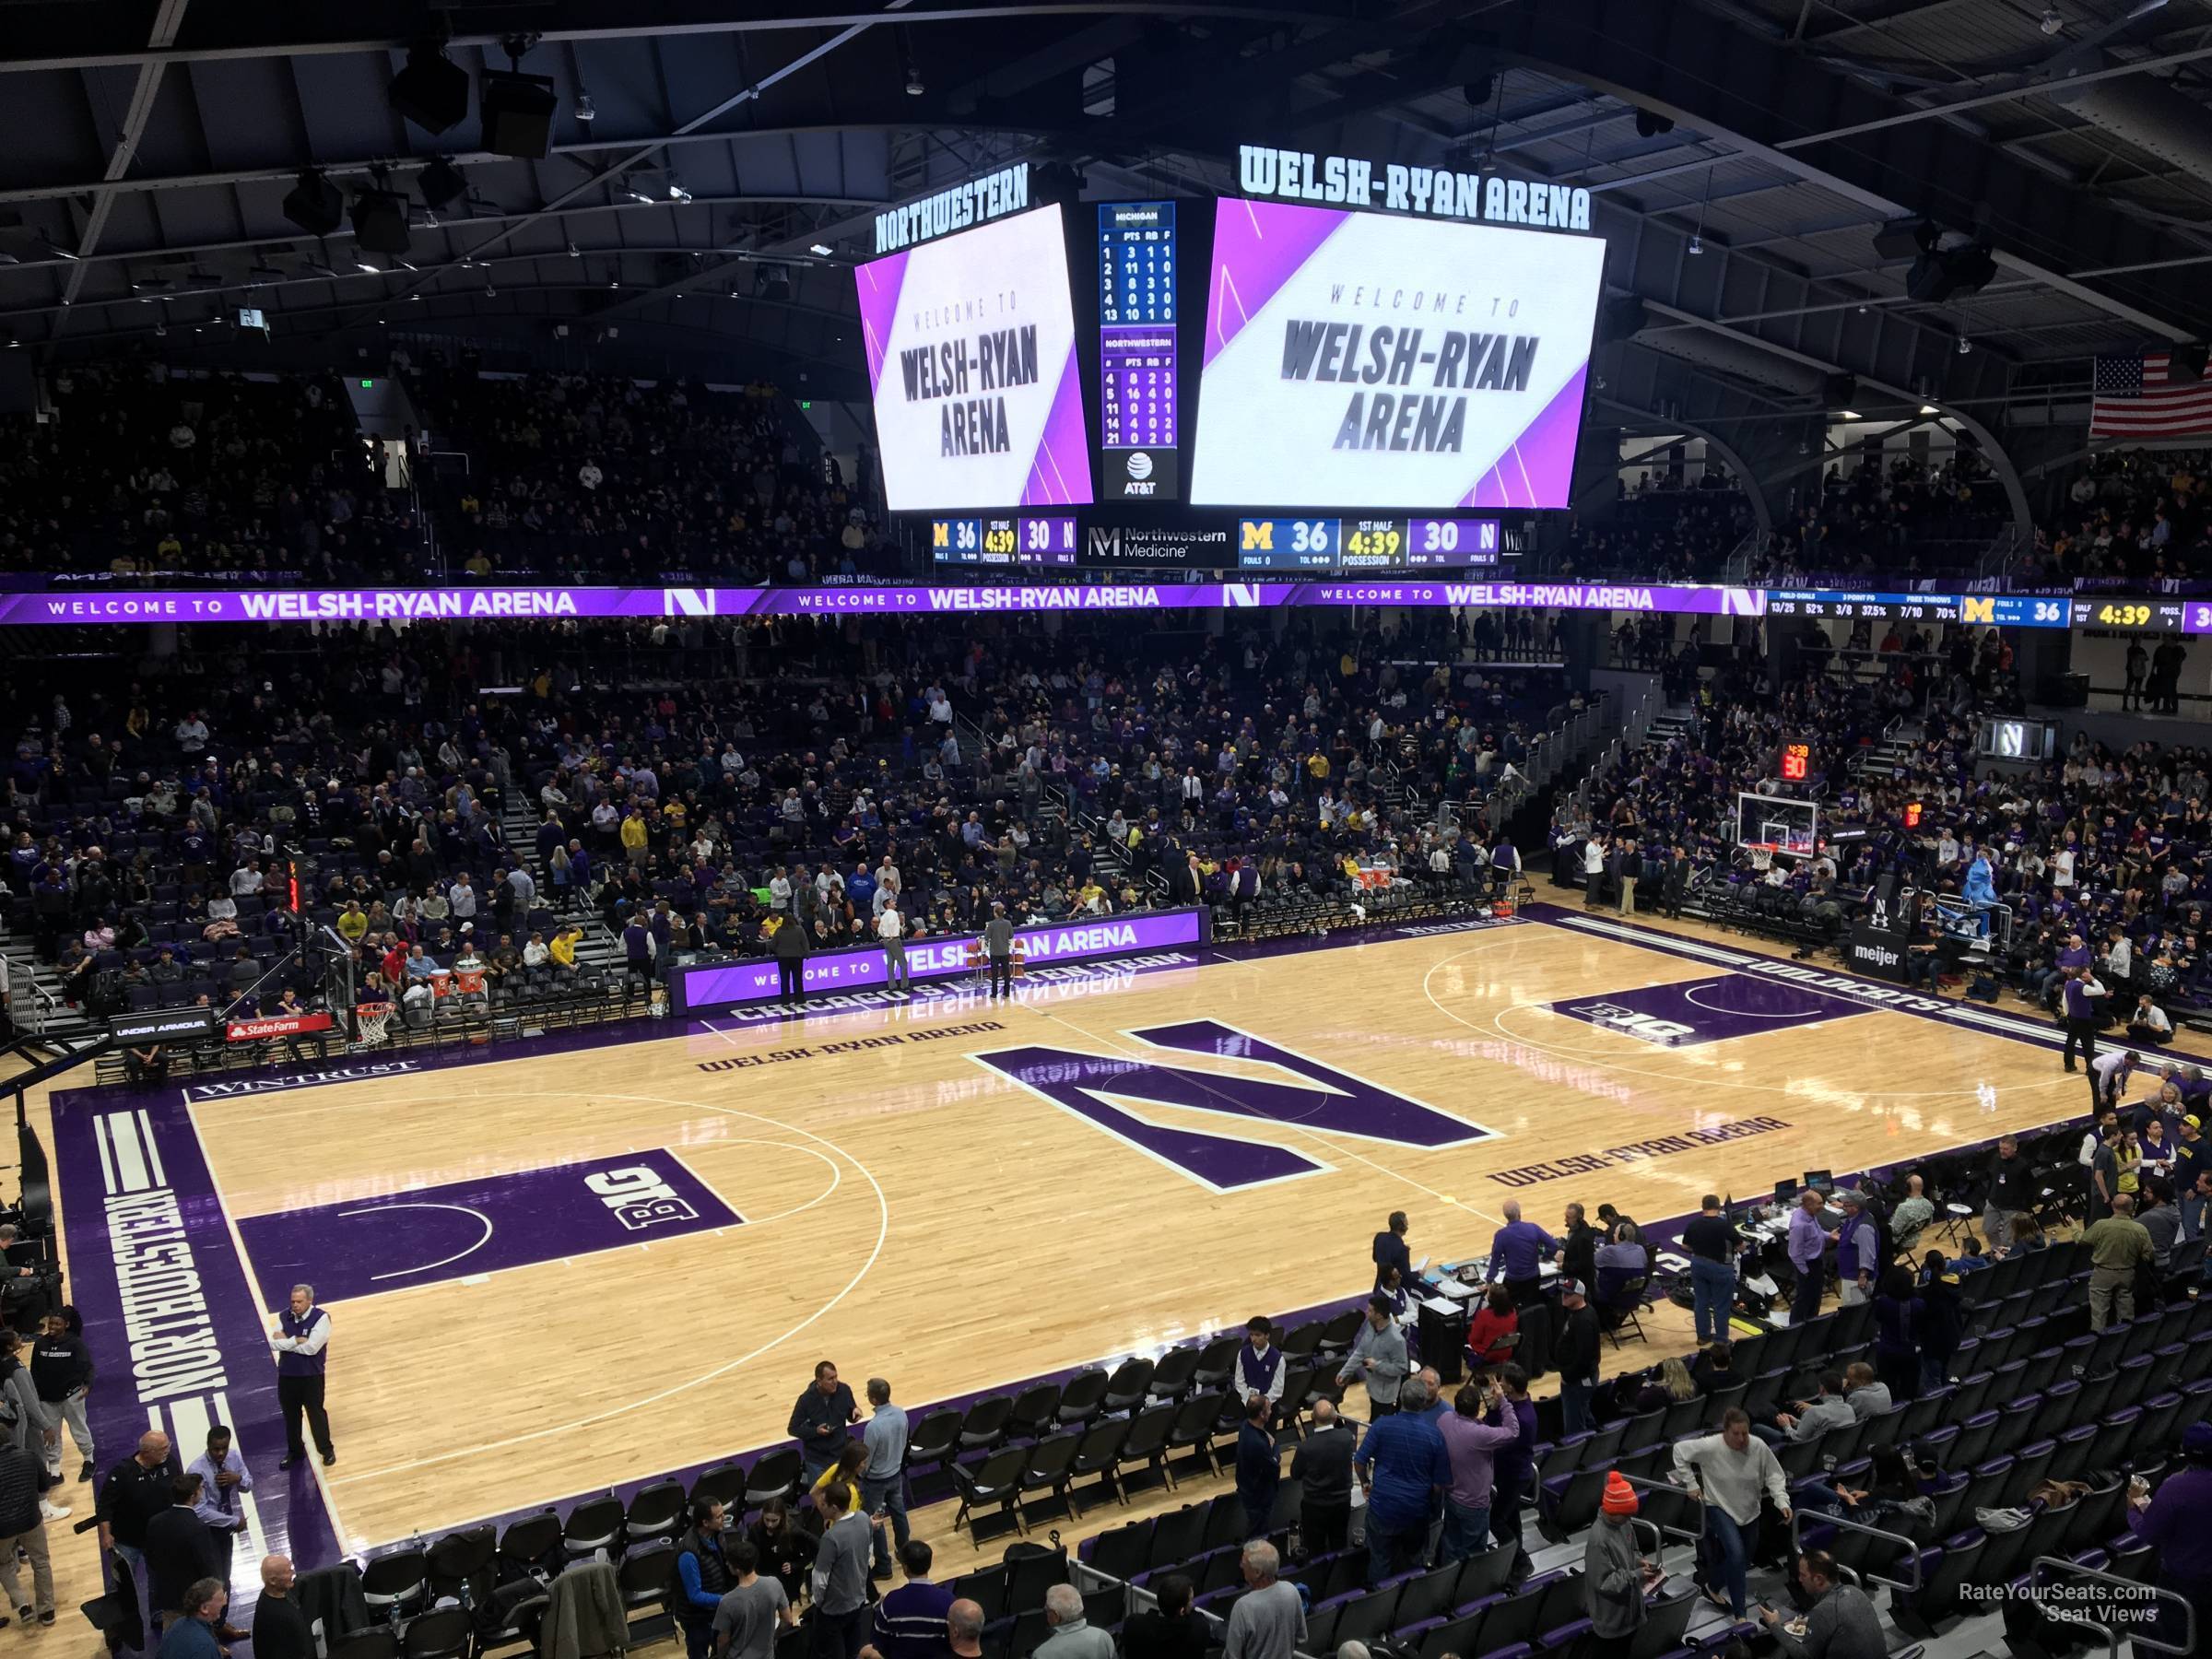 Section 220 at WelshRyan Arena